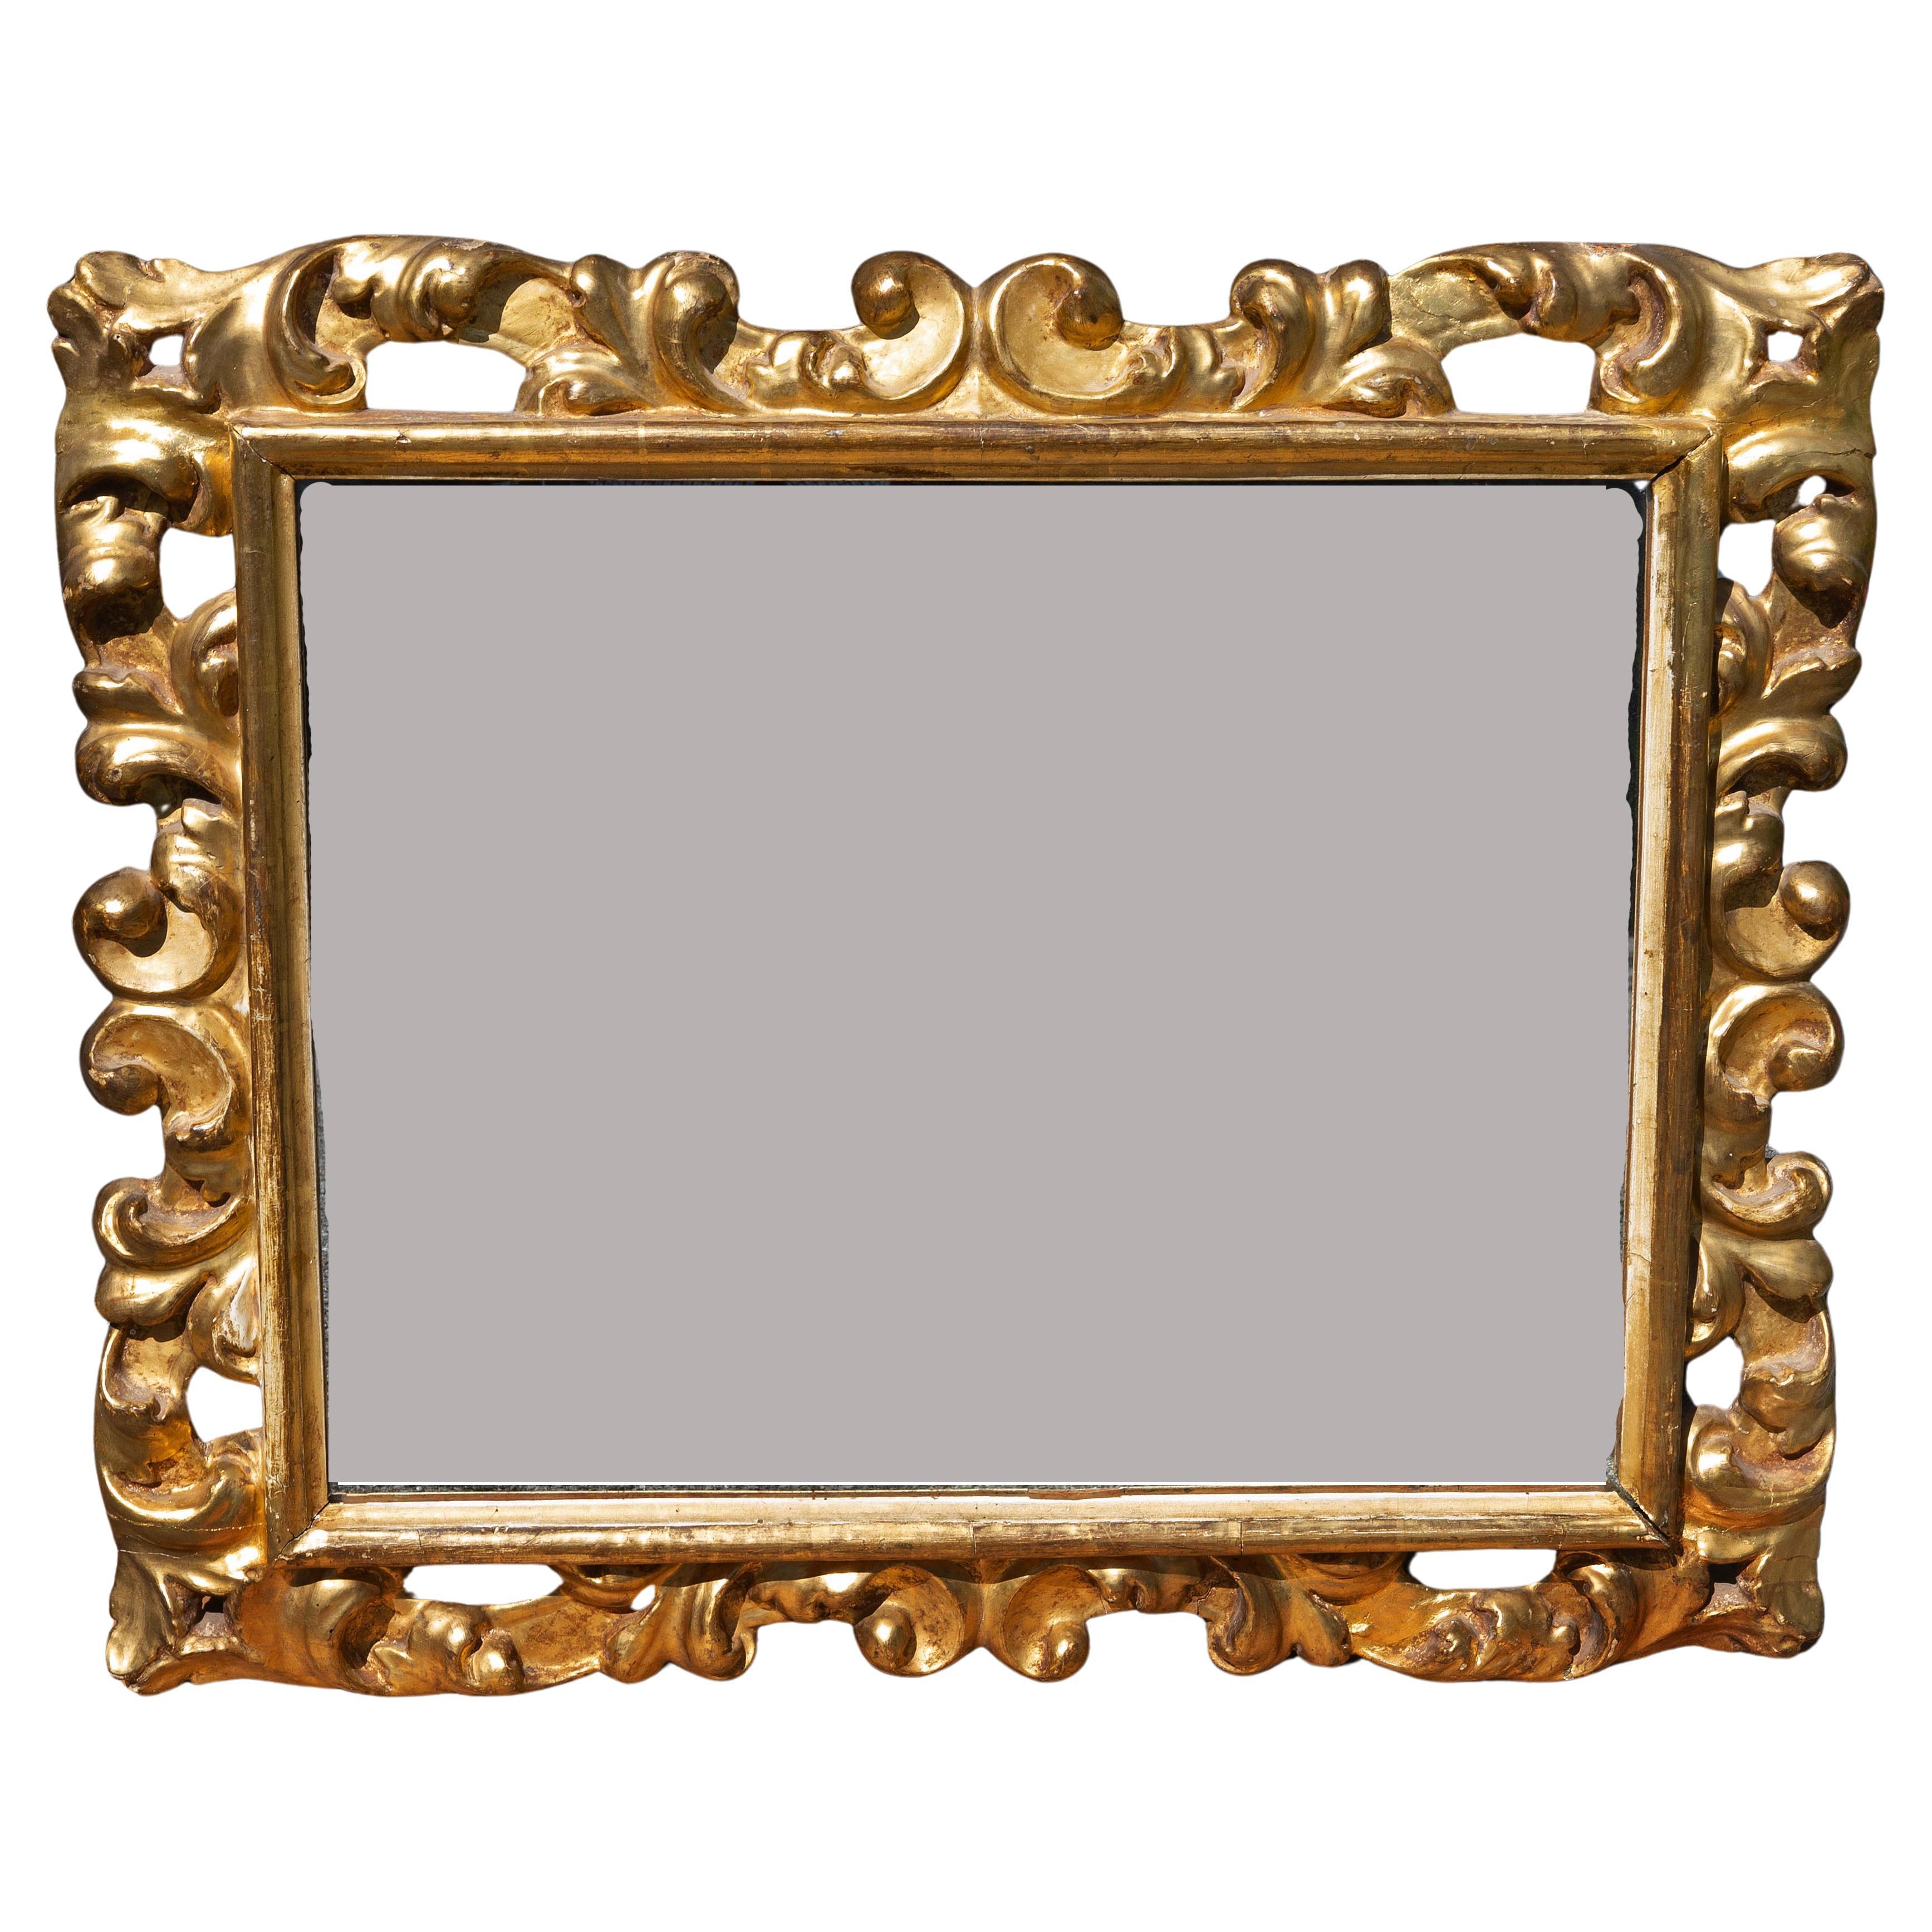 Italian Baroque Carved and Gilt Frame 18th Century For Sale